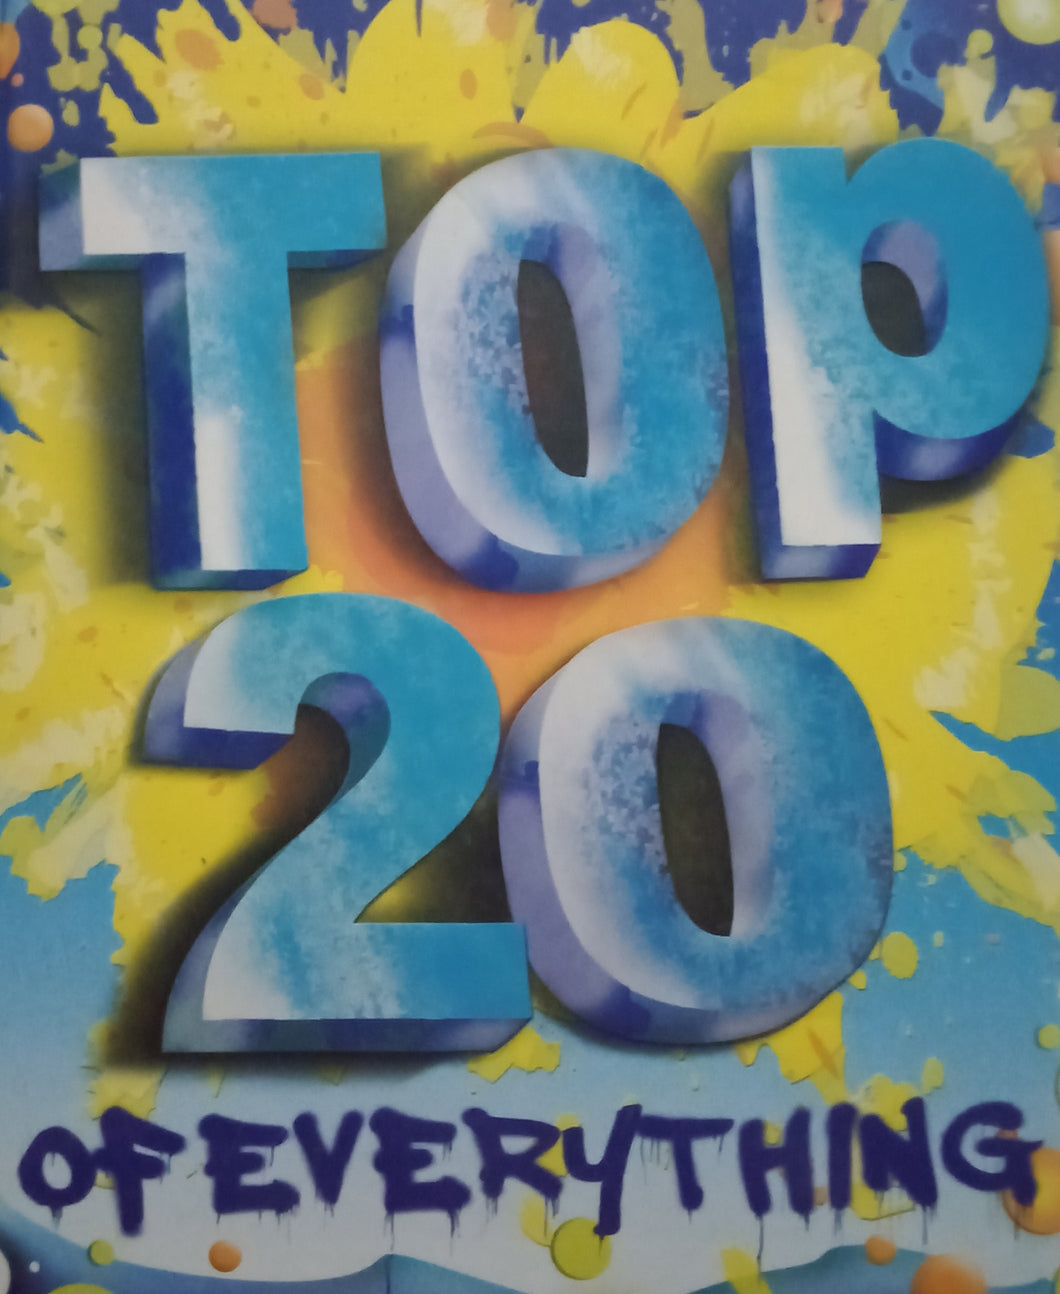 Top 20 Of Everything